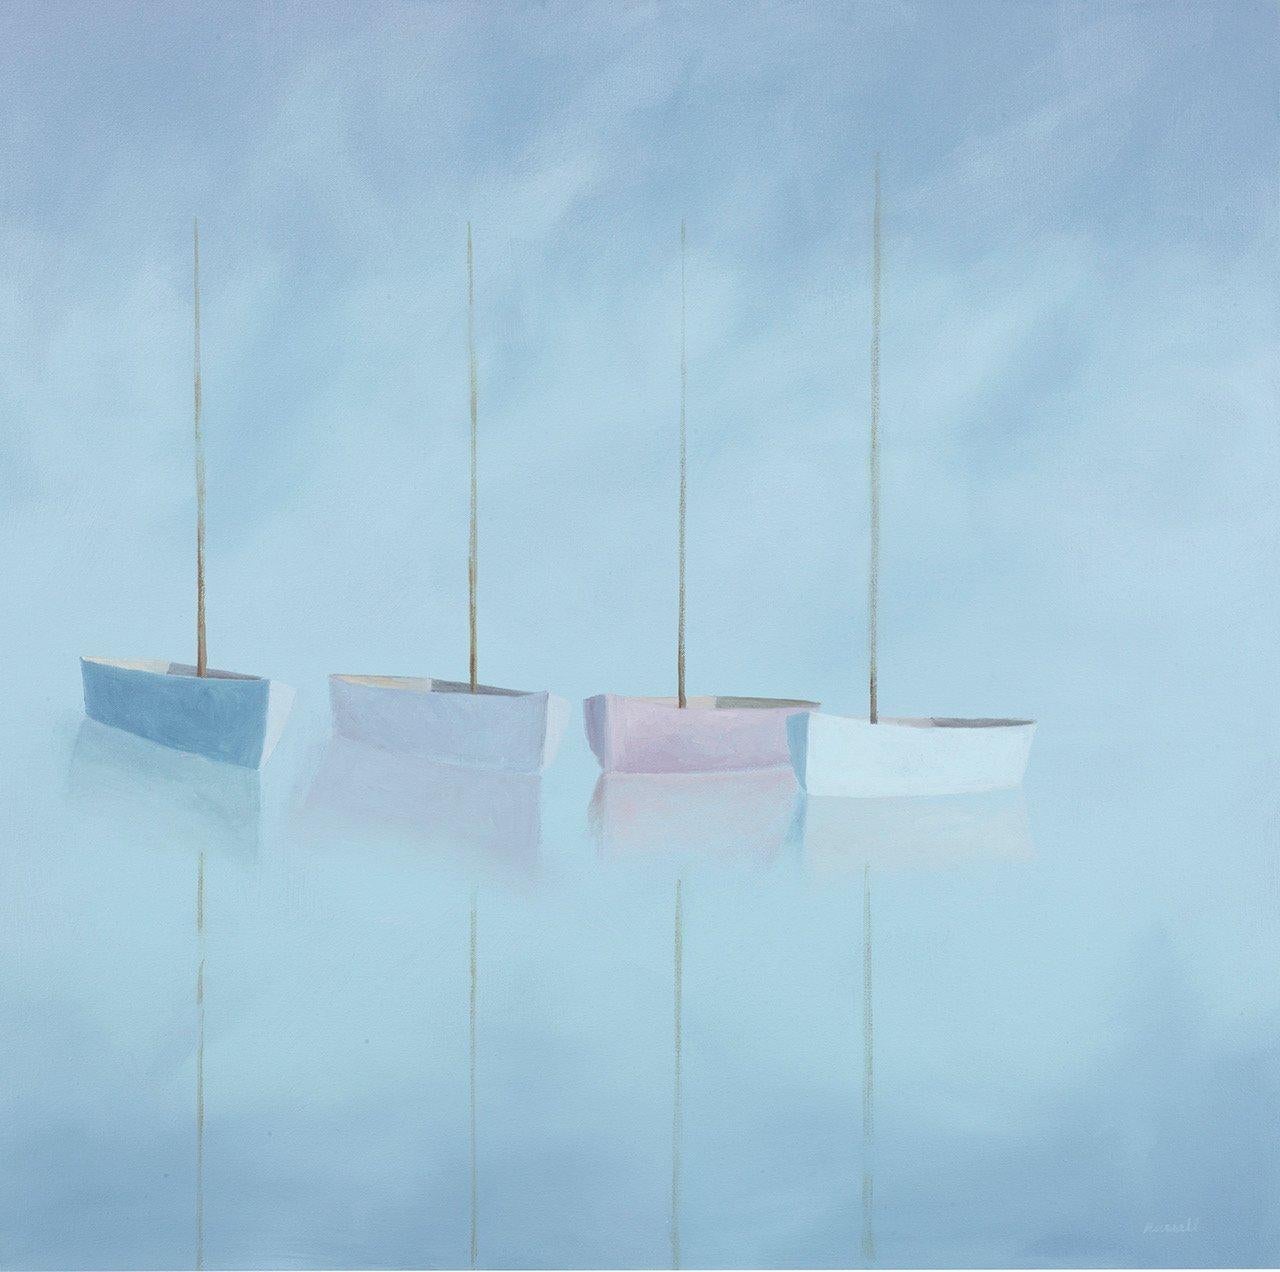 Matthew Jay Russell  Abstract Painting - Matthew Jay Russell, "In a Row" 30x30 Dreamy Coastal Boat Oil Painting on Canvas